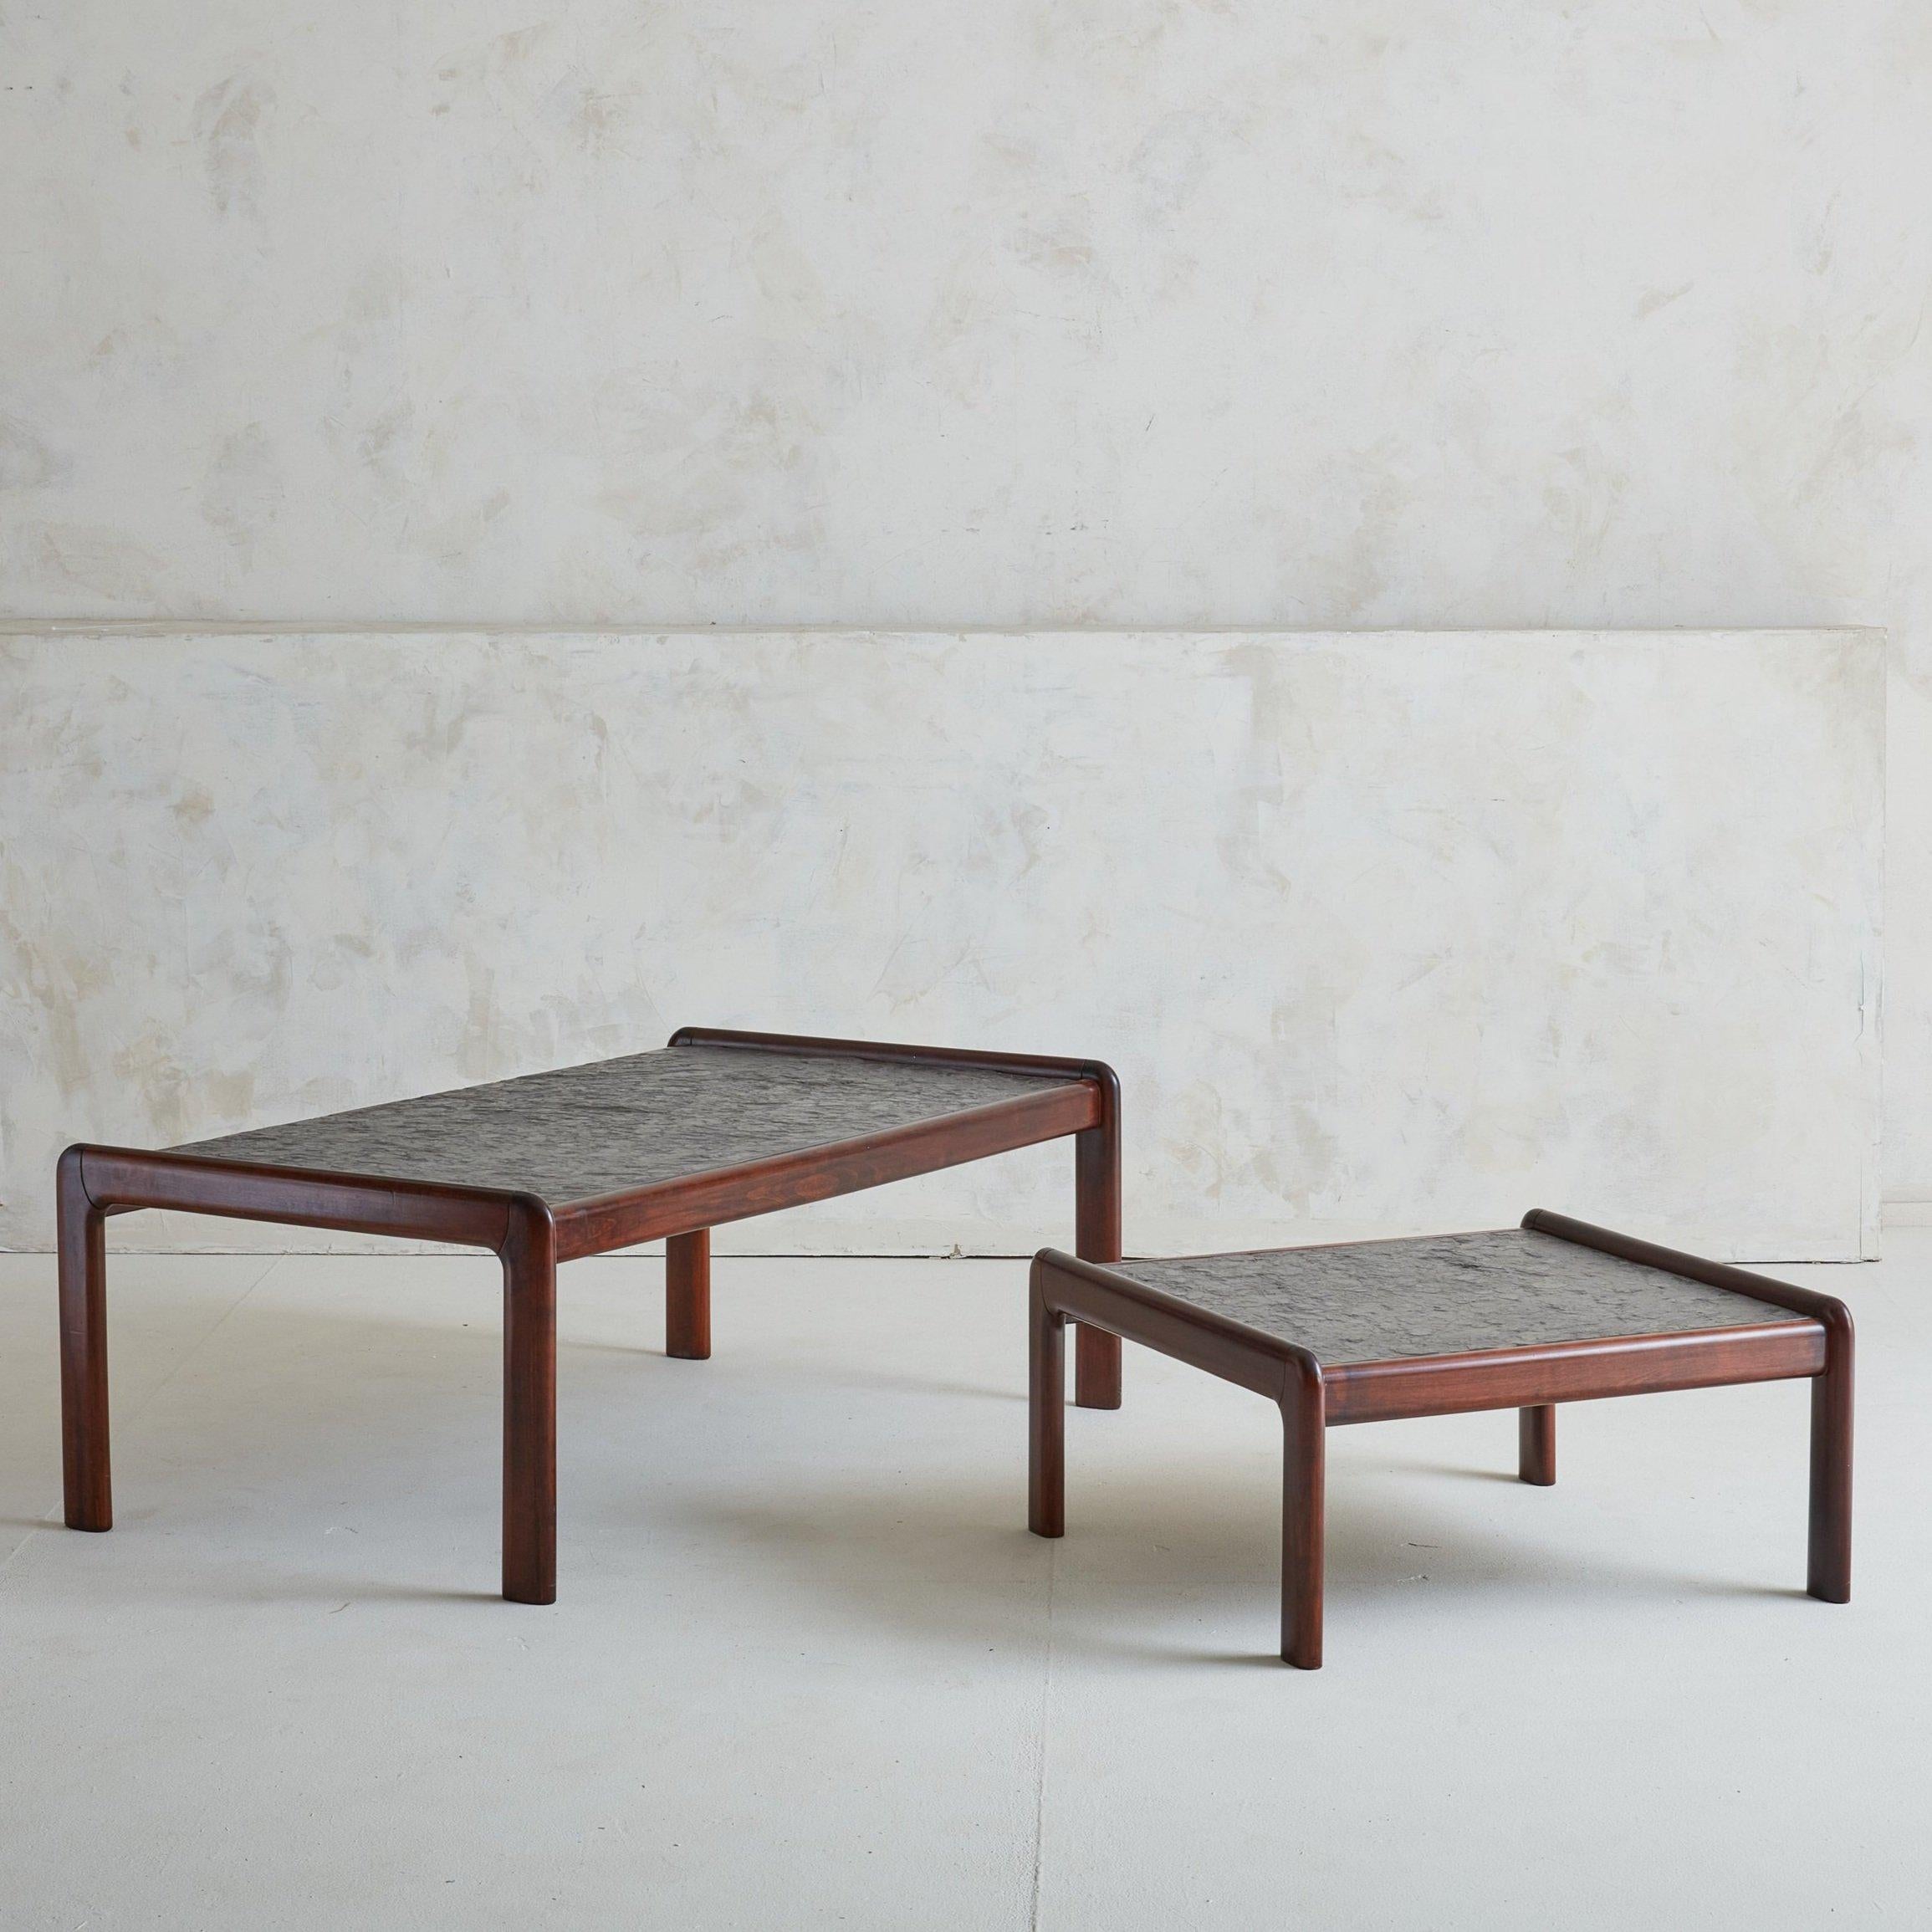 A 1980s French coffee + side table featuring beautifully grained rosewood frames with inlaid textured stone tops. The gentle curve of the frame-legs show excellent craftsmanship and are reminiscent of the classic lines of bentwood, a typical Mid